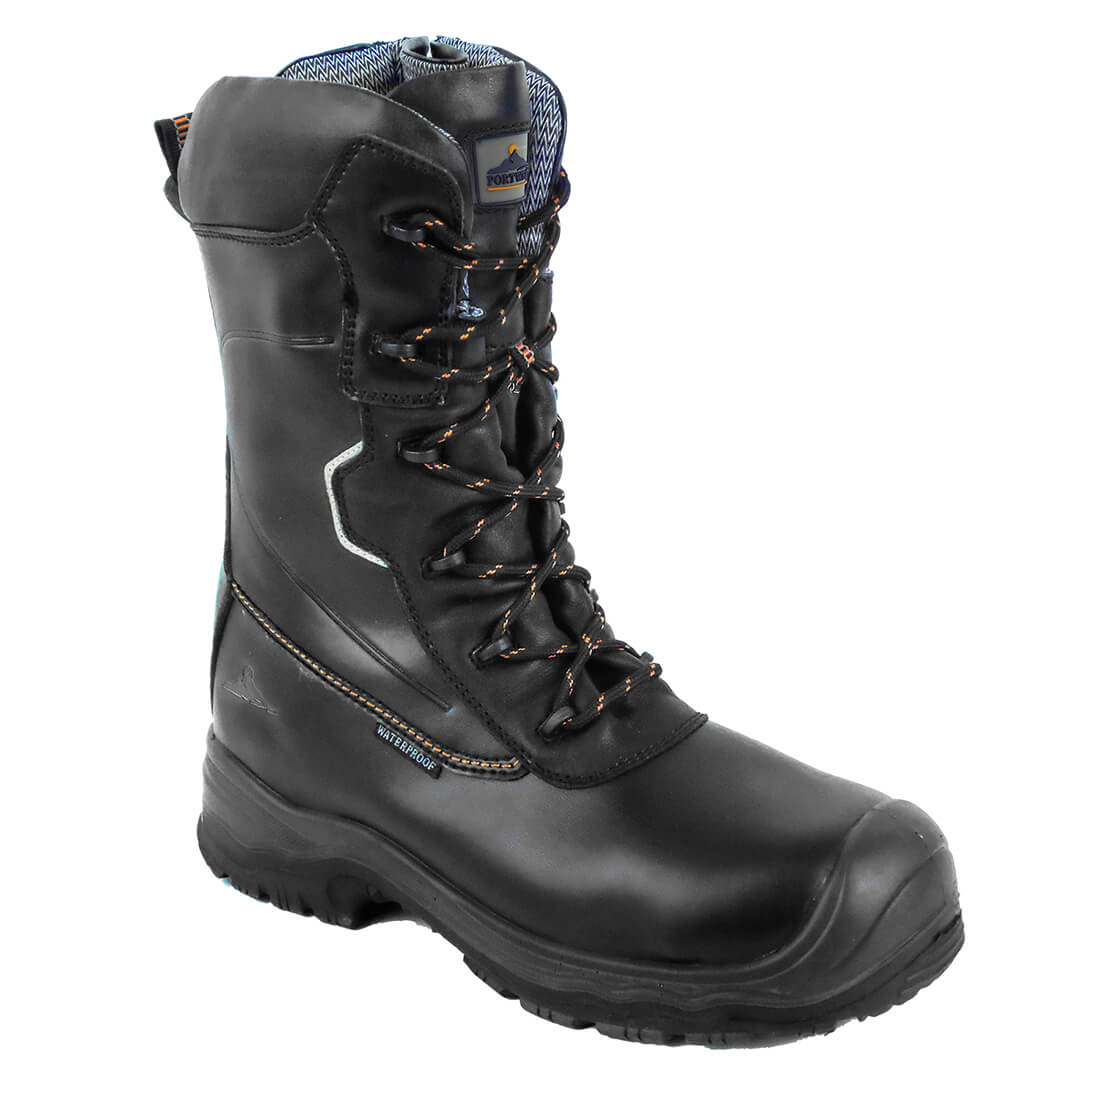 Image of Portwest Mens Compositelite Traction Safety Boots Black Size 10